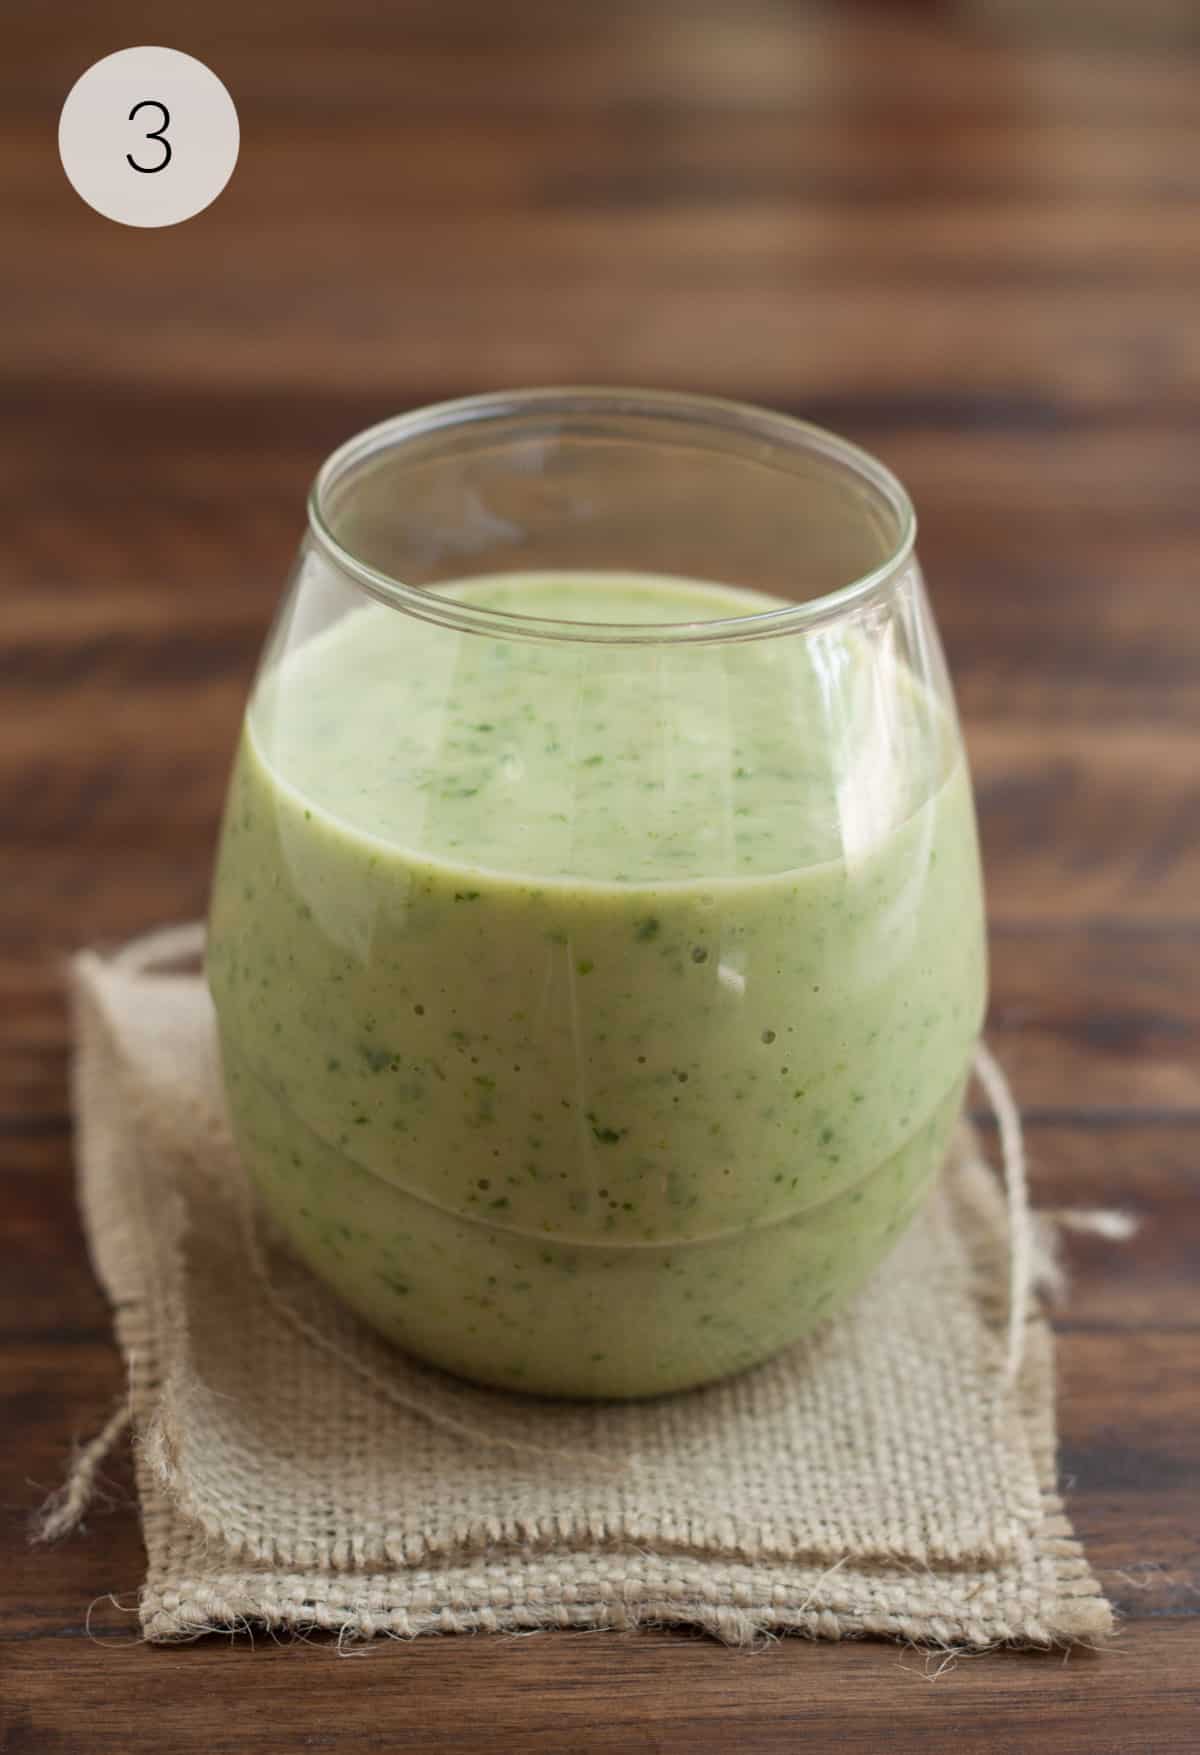 Clear glass filled with banana spinach avocado smoothie on a brown burlap napkin.